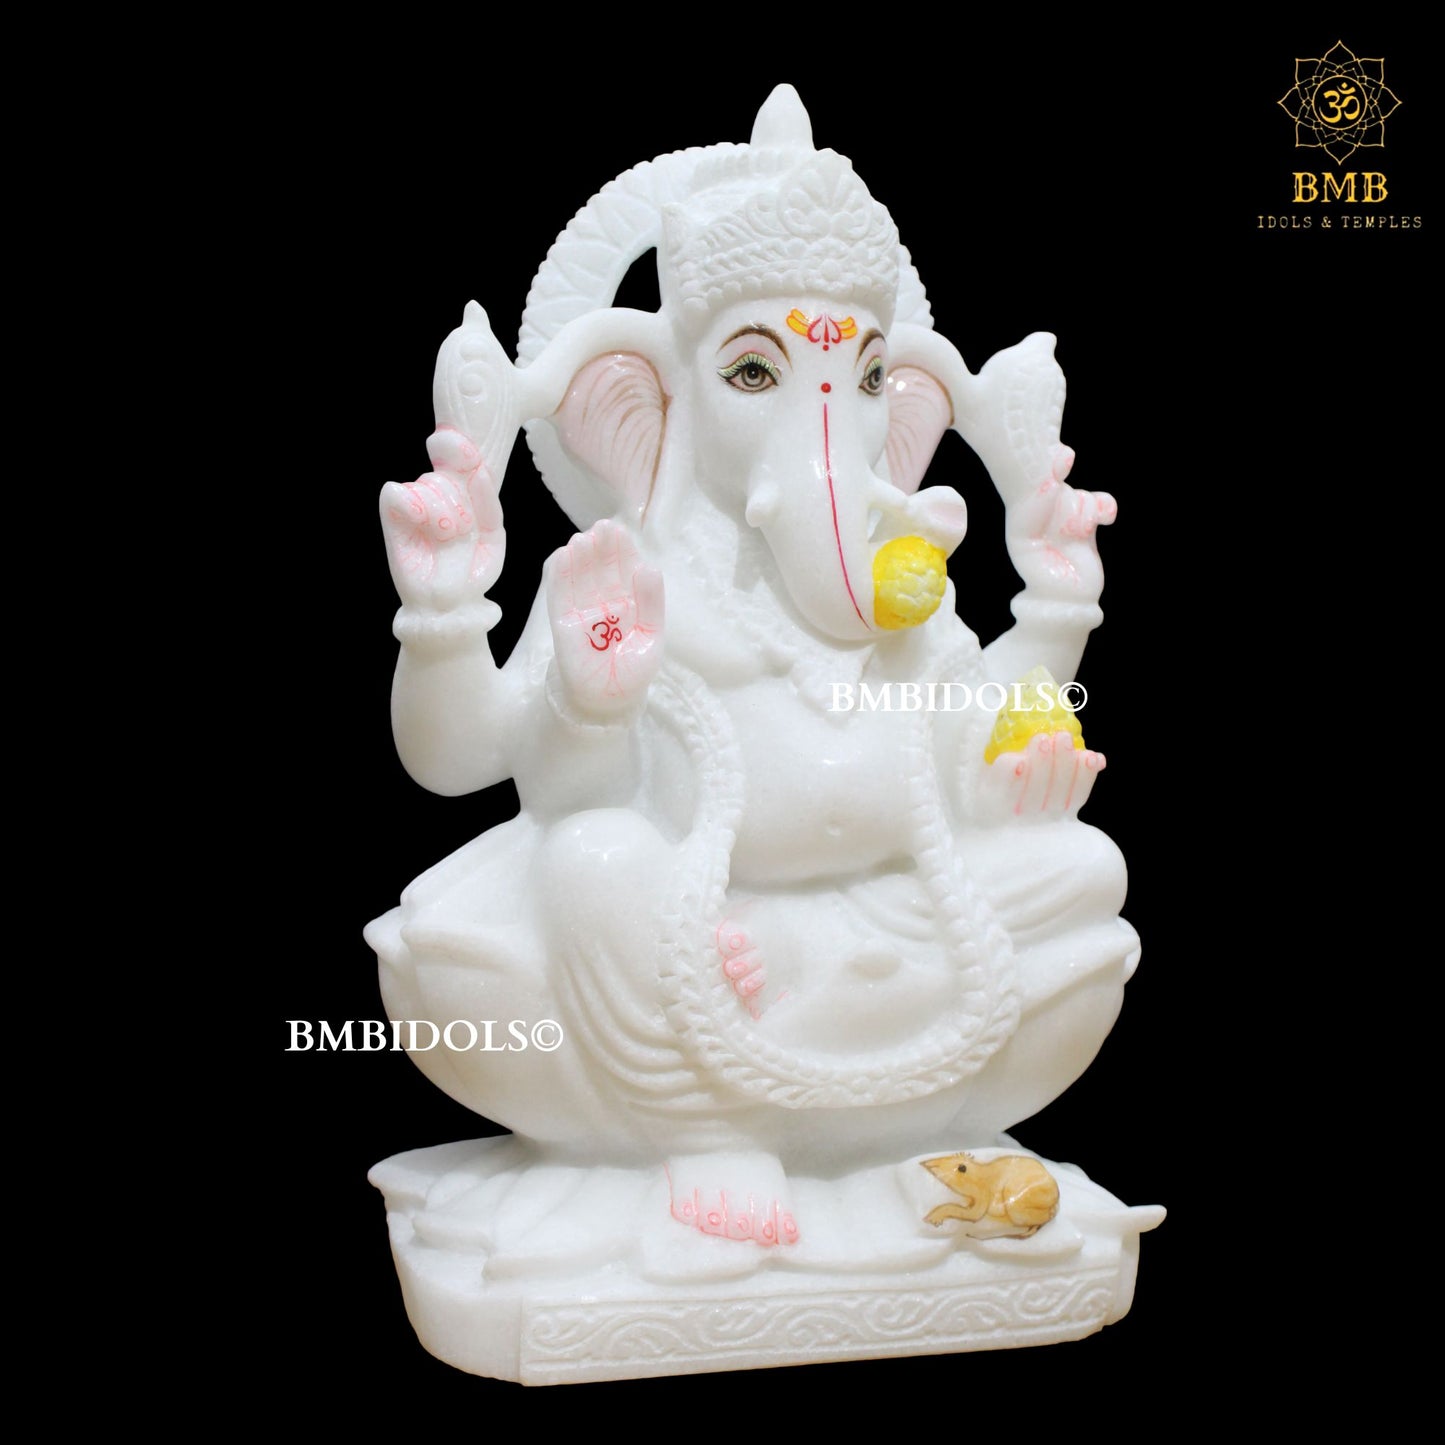 White Marble Ganesh Statue made Sitting on Lotus in 15inches